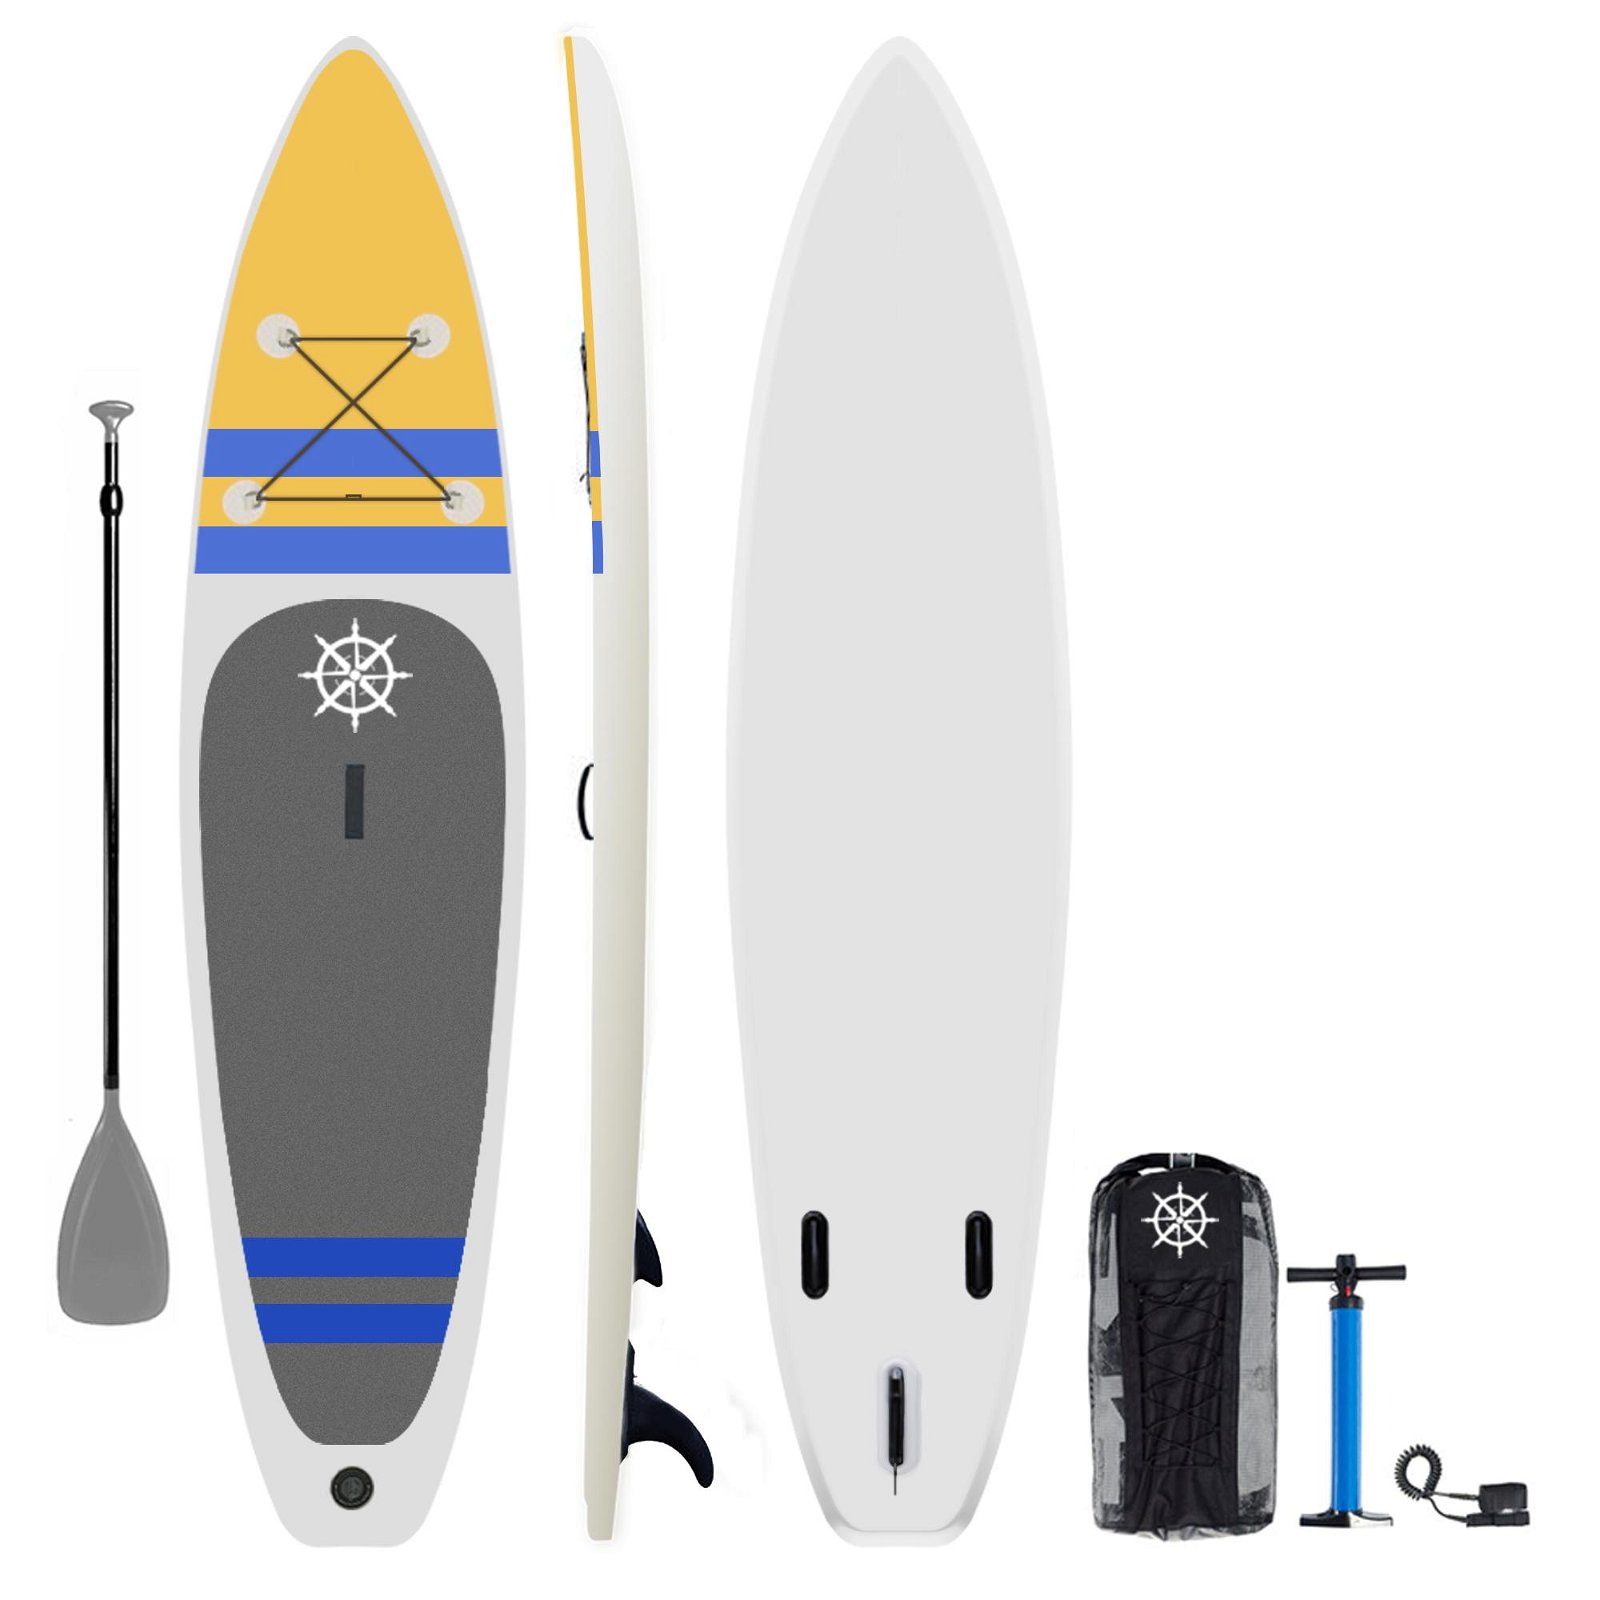 Explorerboards P10 11' long inflatable stand up paddle board package